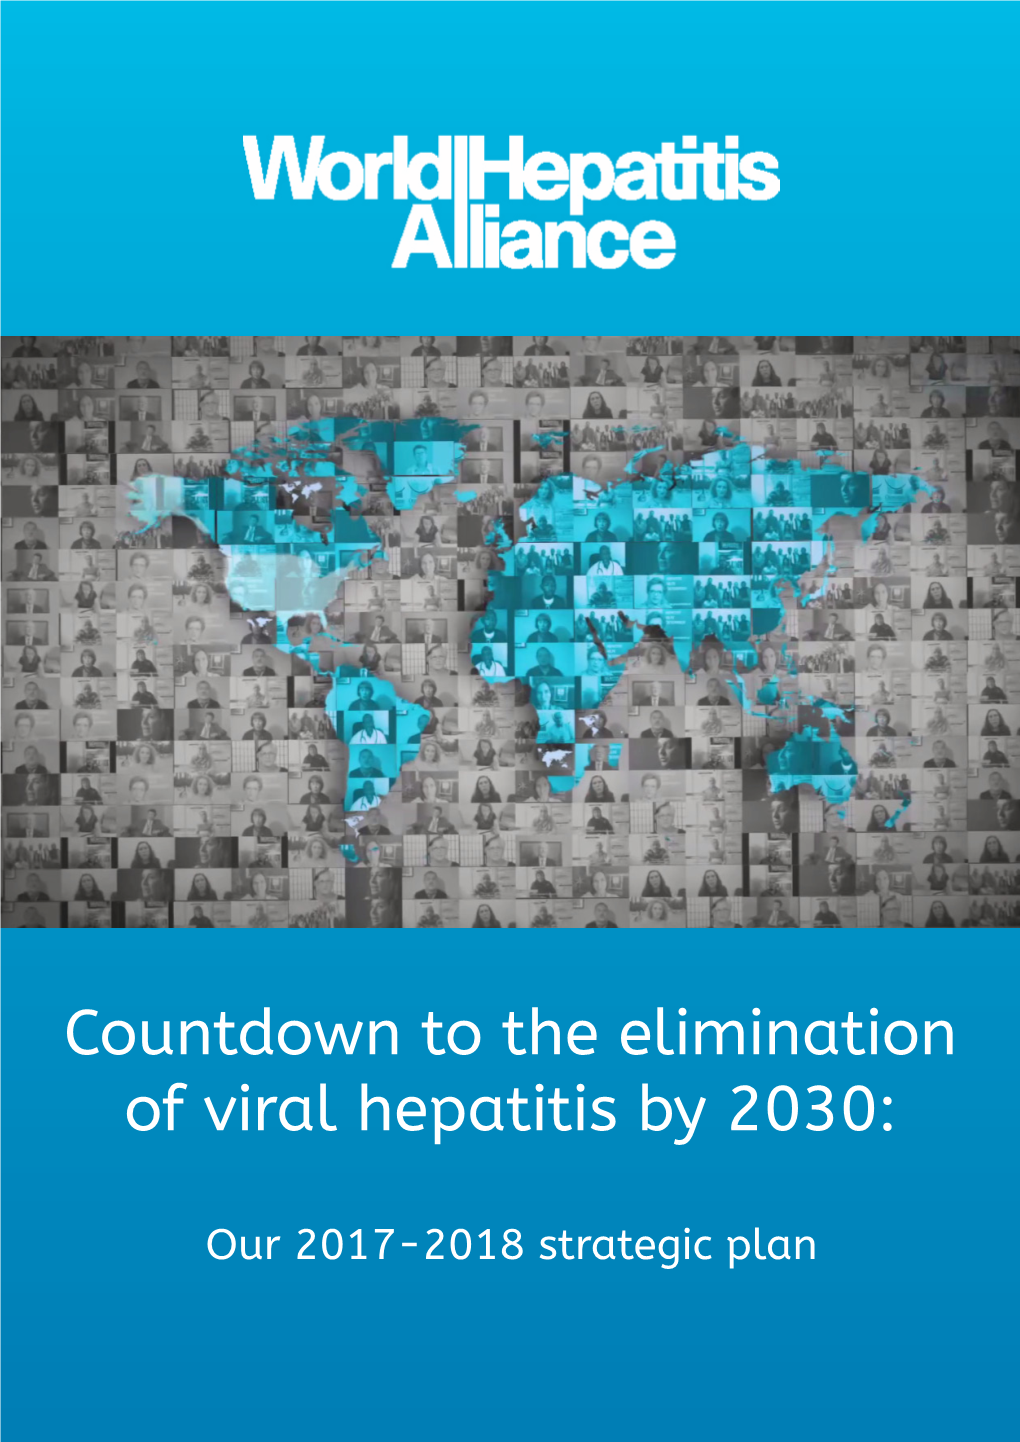 Countdown to the Elimination of Viral Hepatitis by 2030